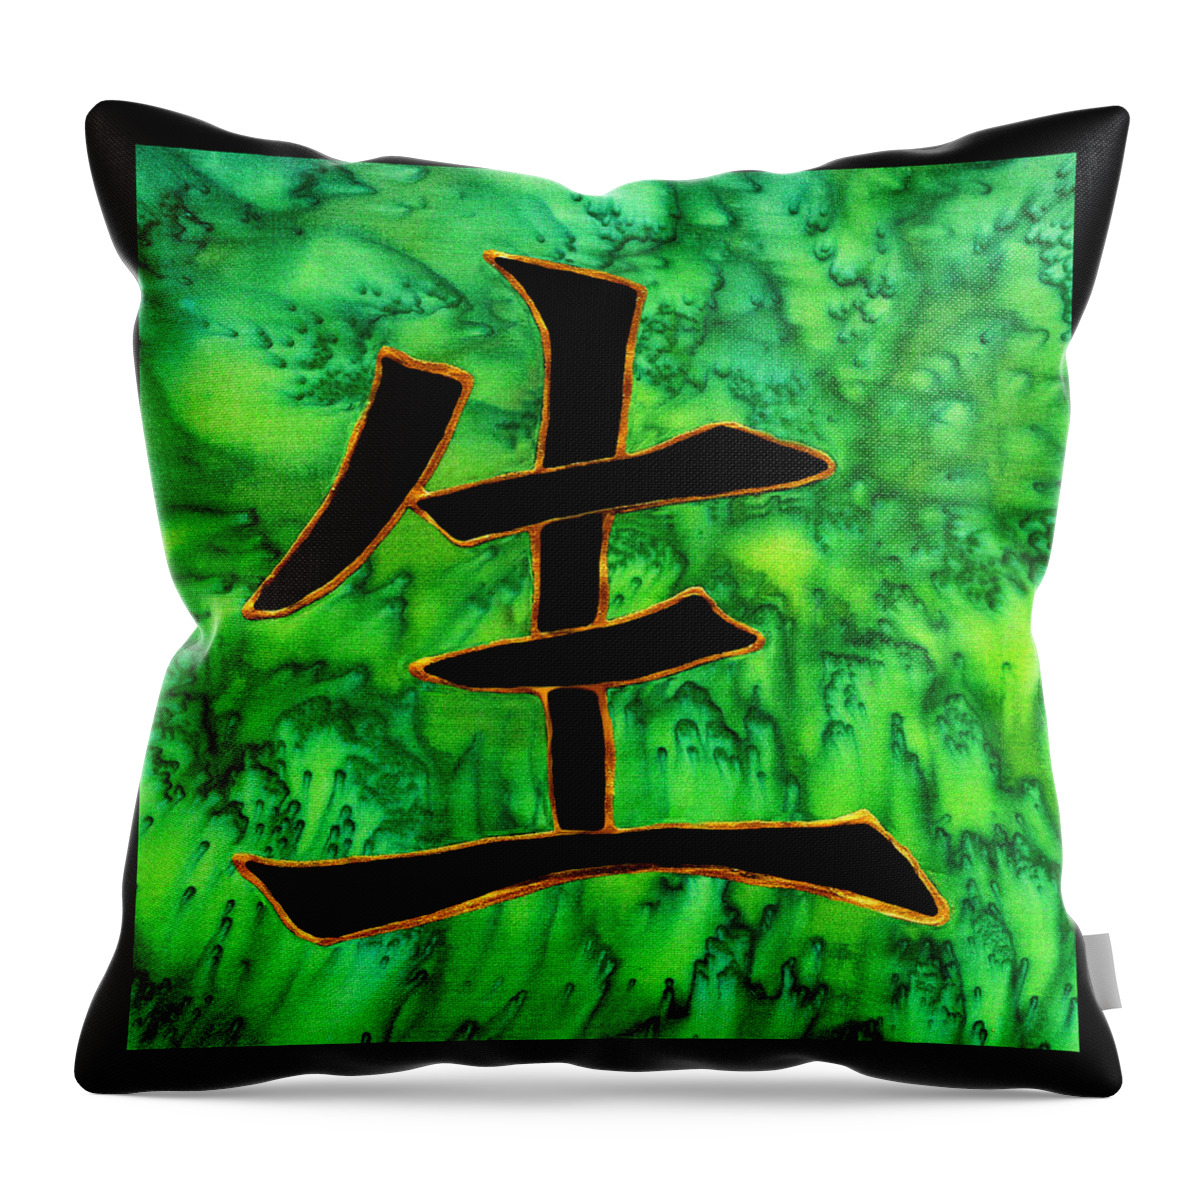 Life Kanji Throw Pillow featuring the painting Life Kanji by Victoria Page